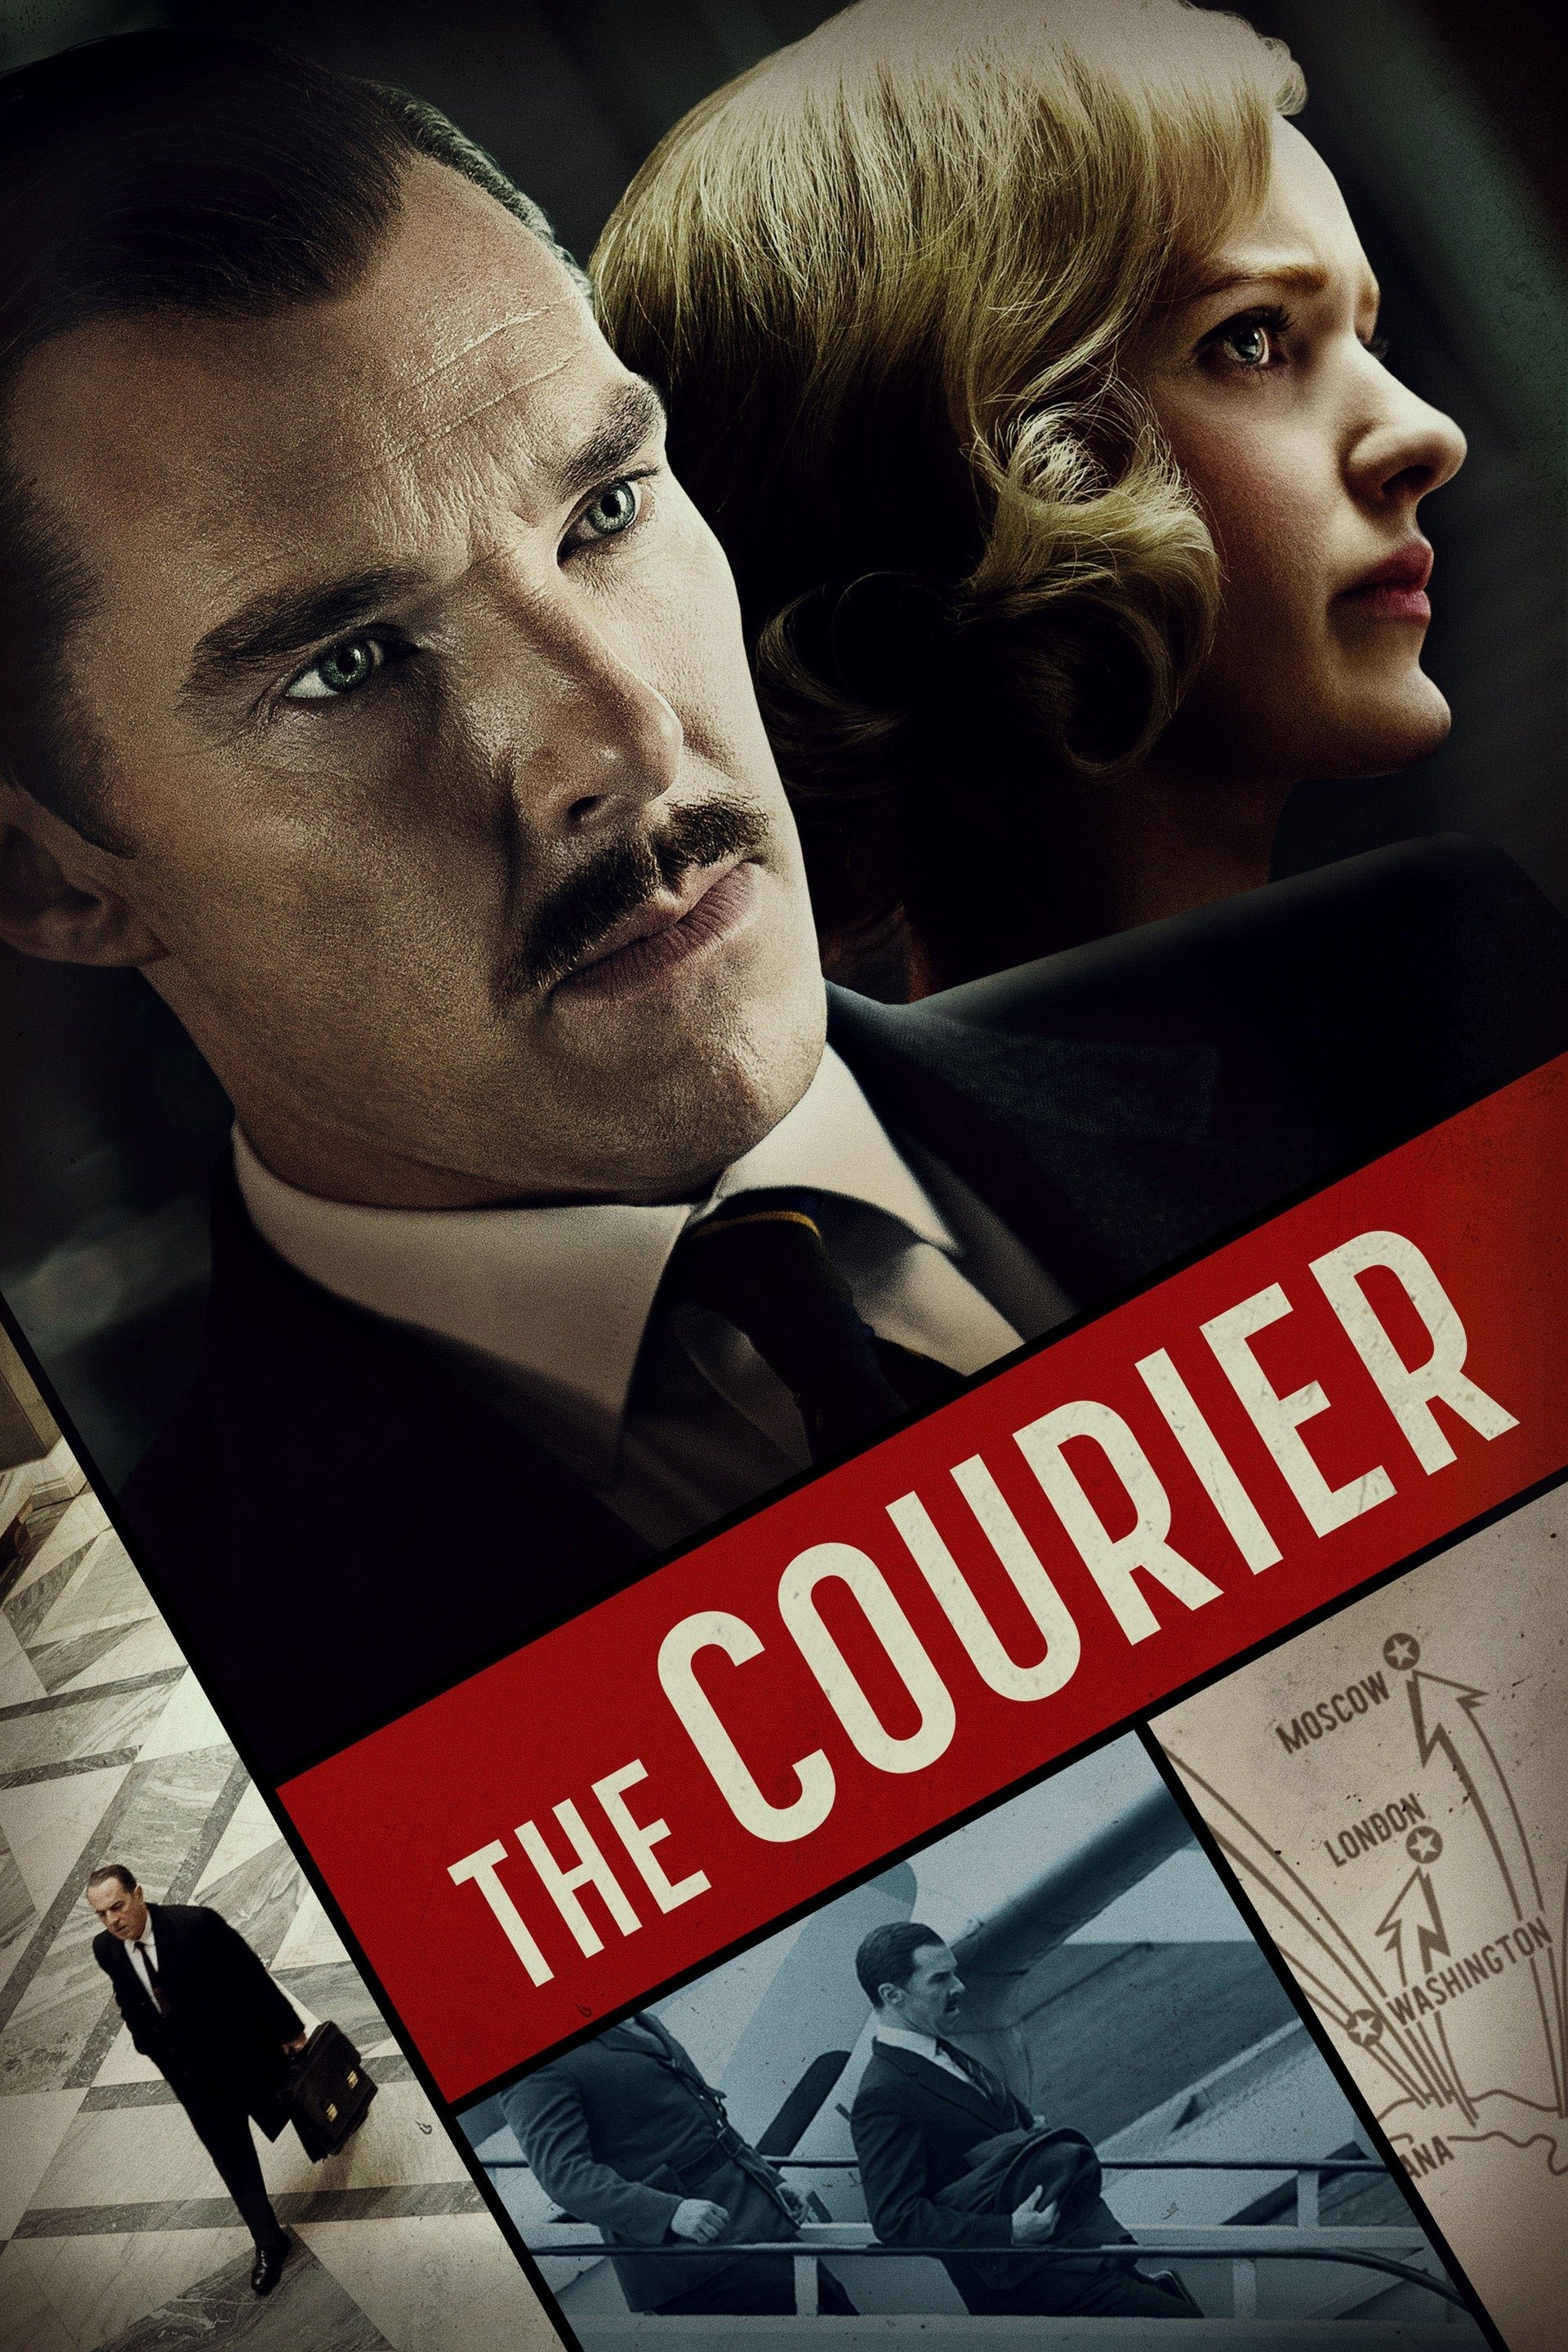 The Courier movie, Full movie online, Streaming on Plex, Action-packed thriller, 1920x2880 HD Handy